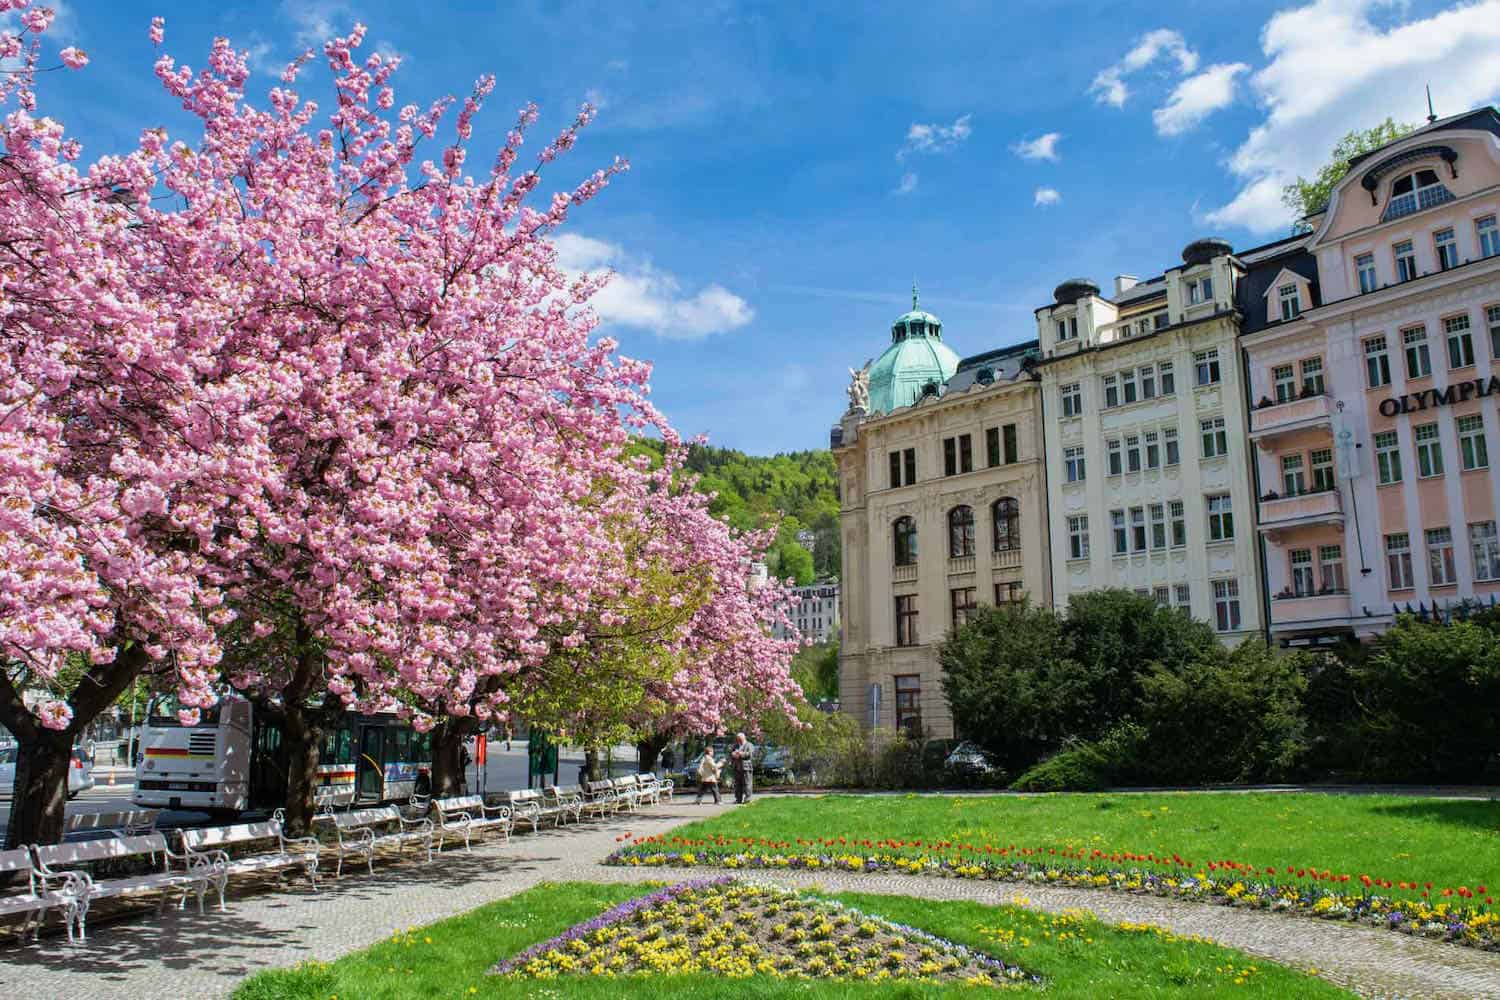 Pink blooming trees across from buildings with lawn between them in Karlovy Vary.